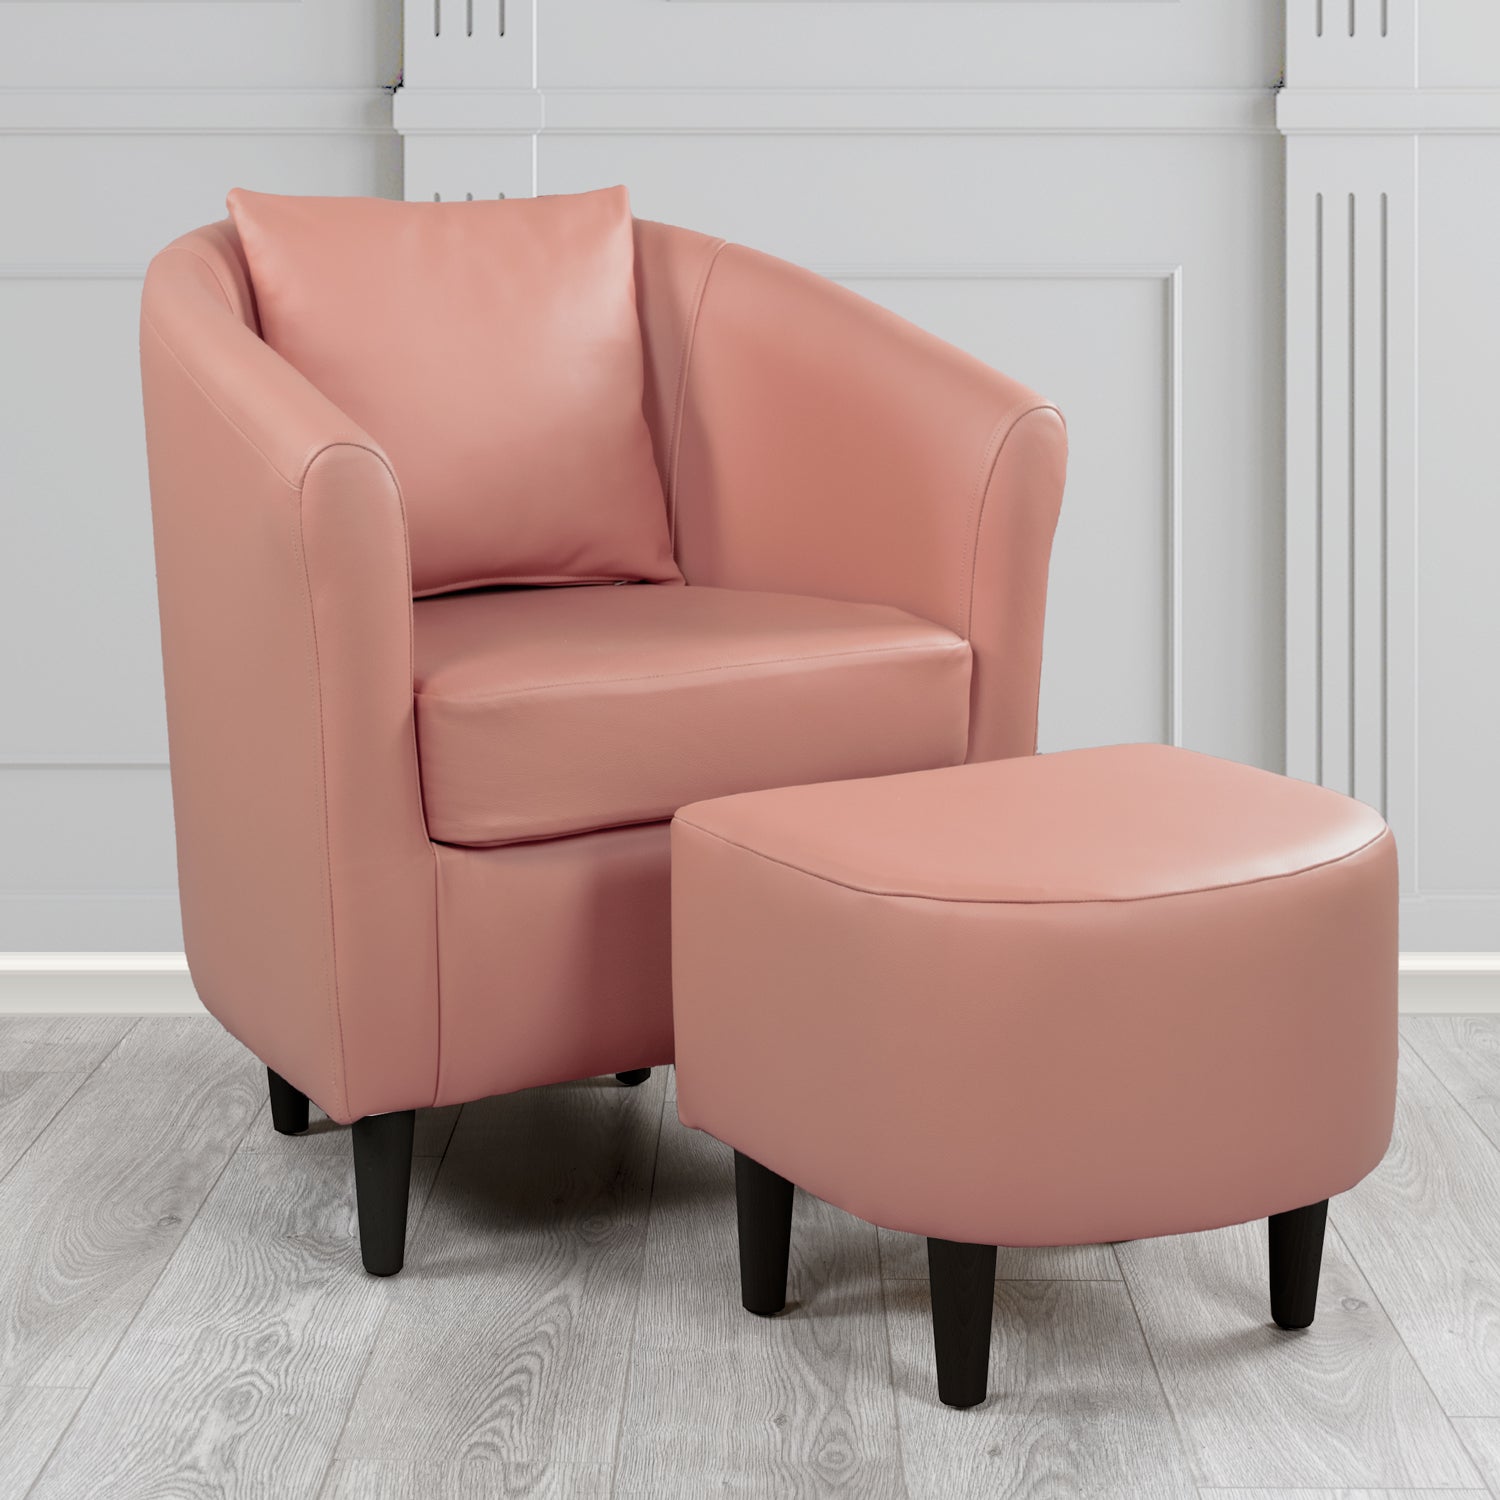 St Tropez Shelly Brick Red Crib 5 Genuine Leather Tub Chair & Footstool Set With Scatter Cushion (6619466563626)